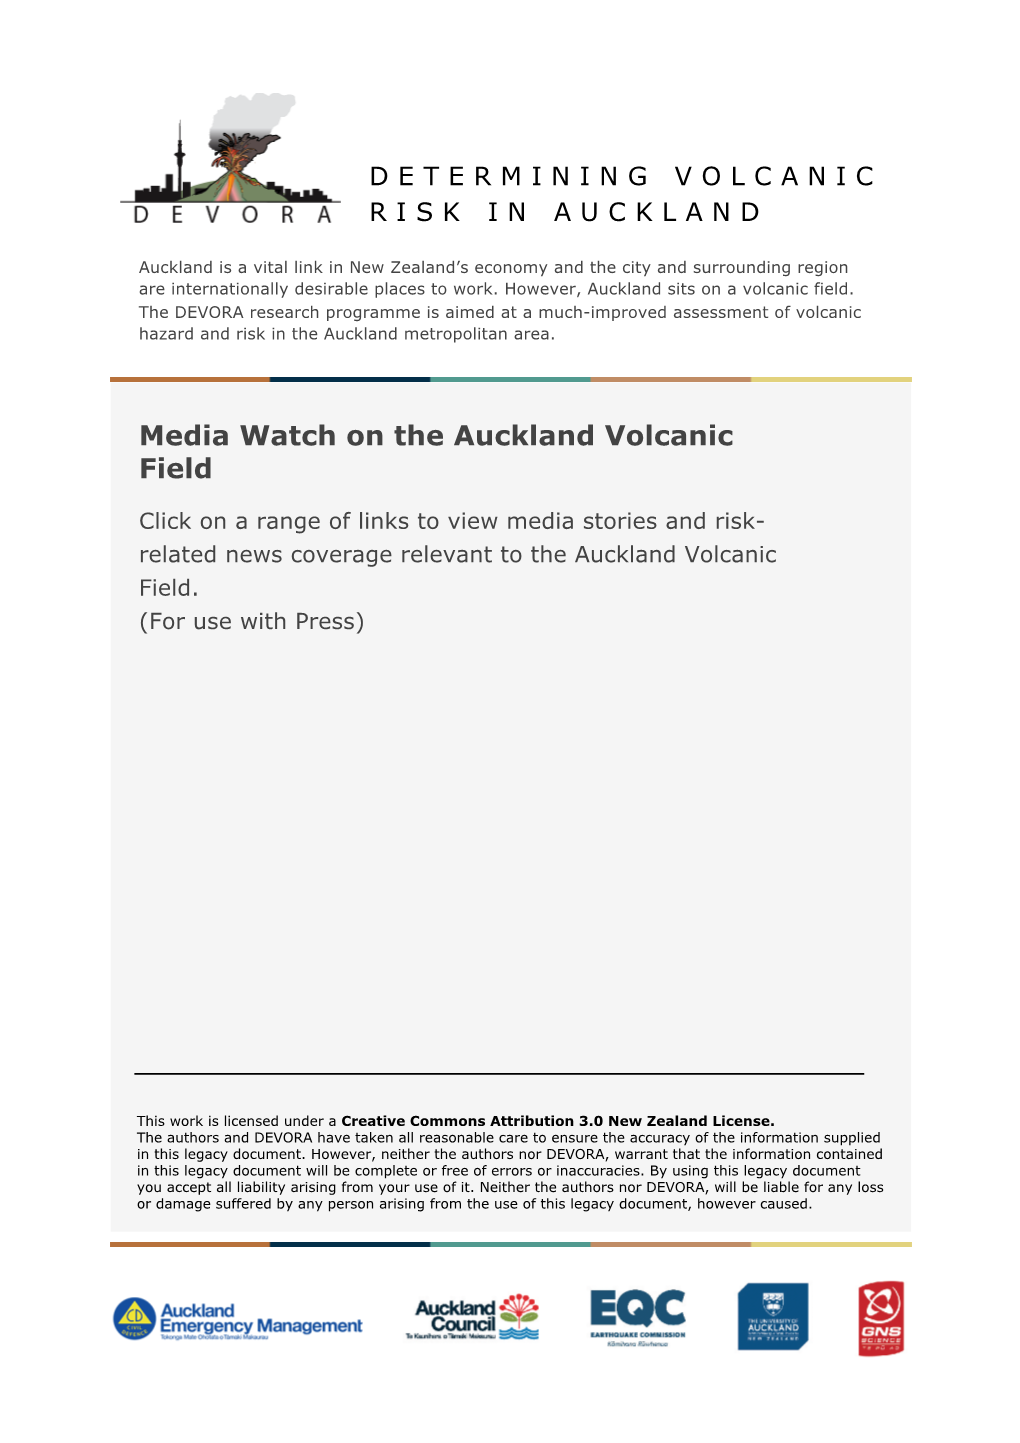 Media Watch on the Auckland Volcanic Field